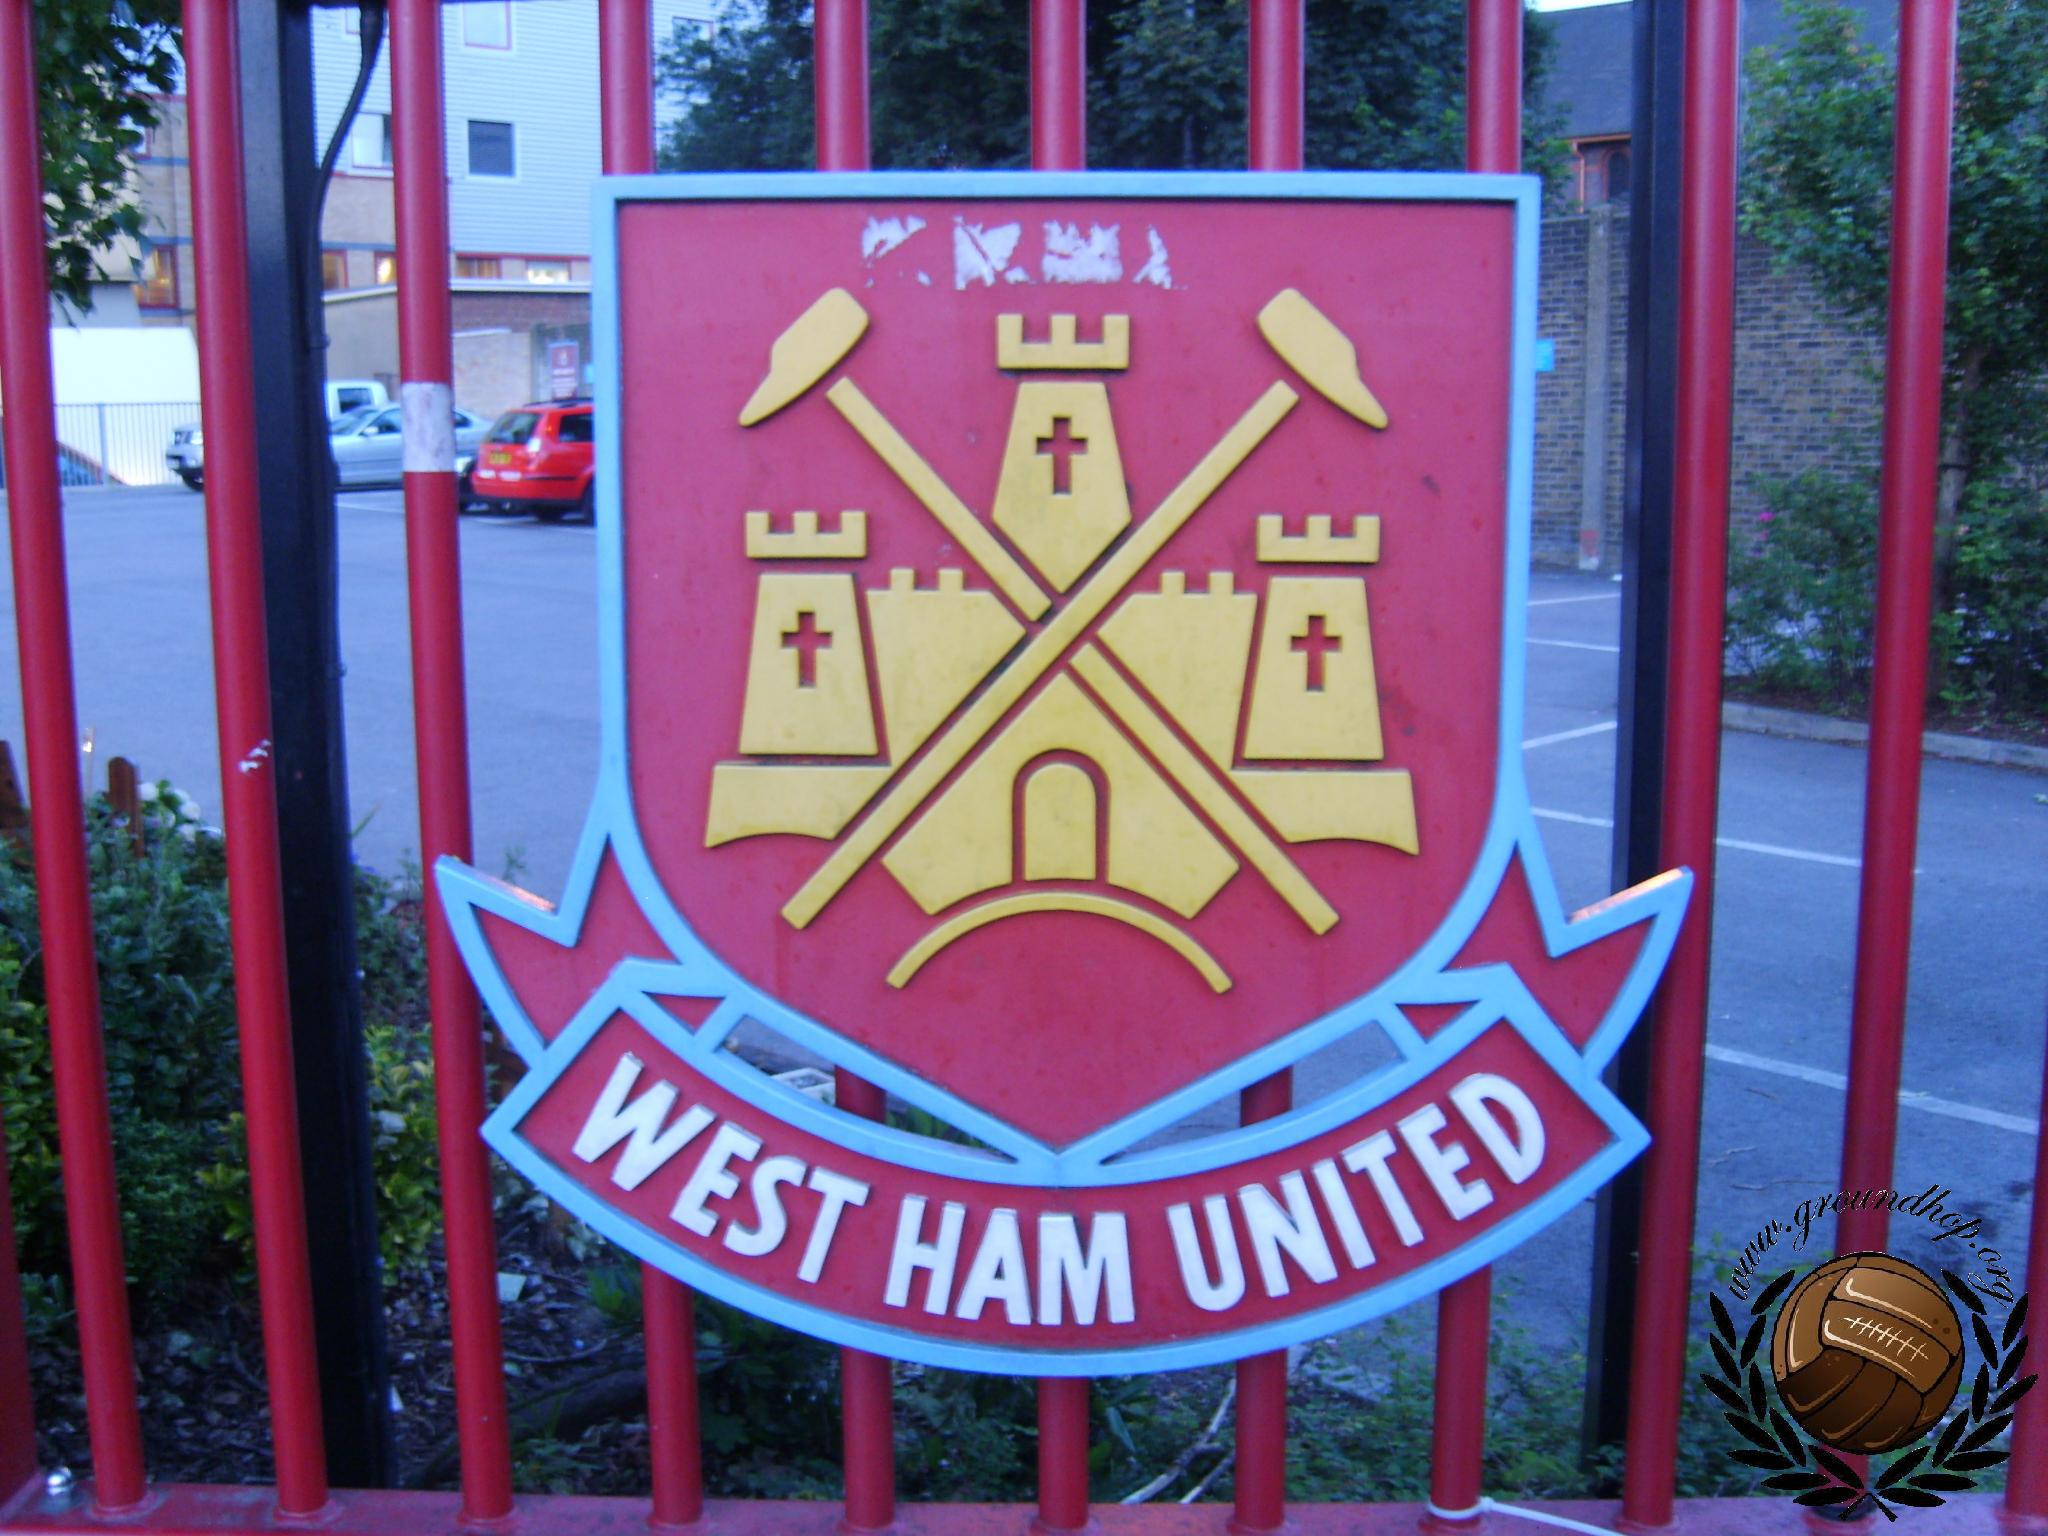 The Beloved Fc West Ham United Wallpaper And Image